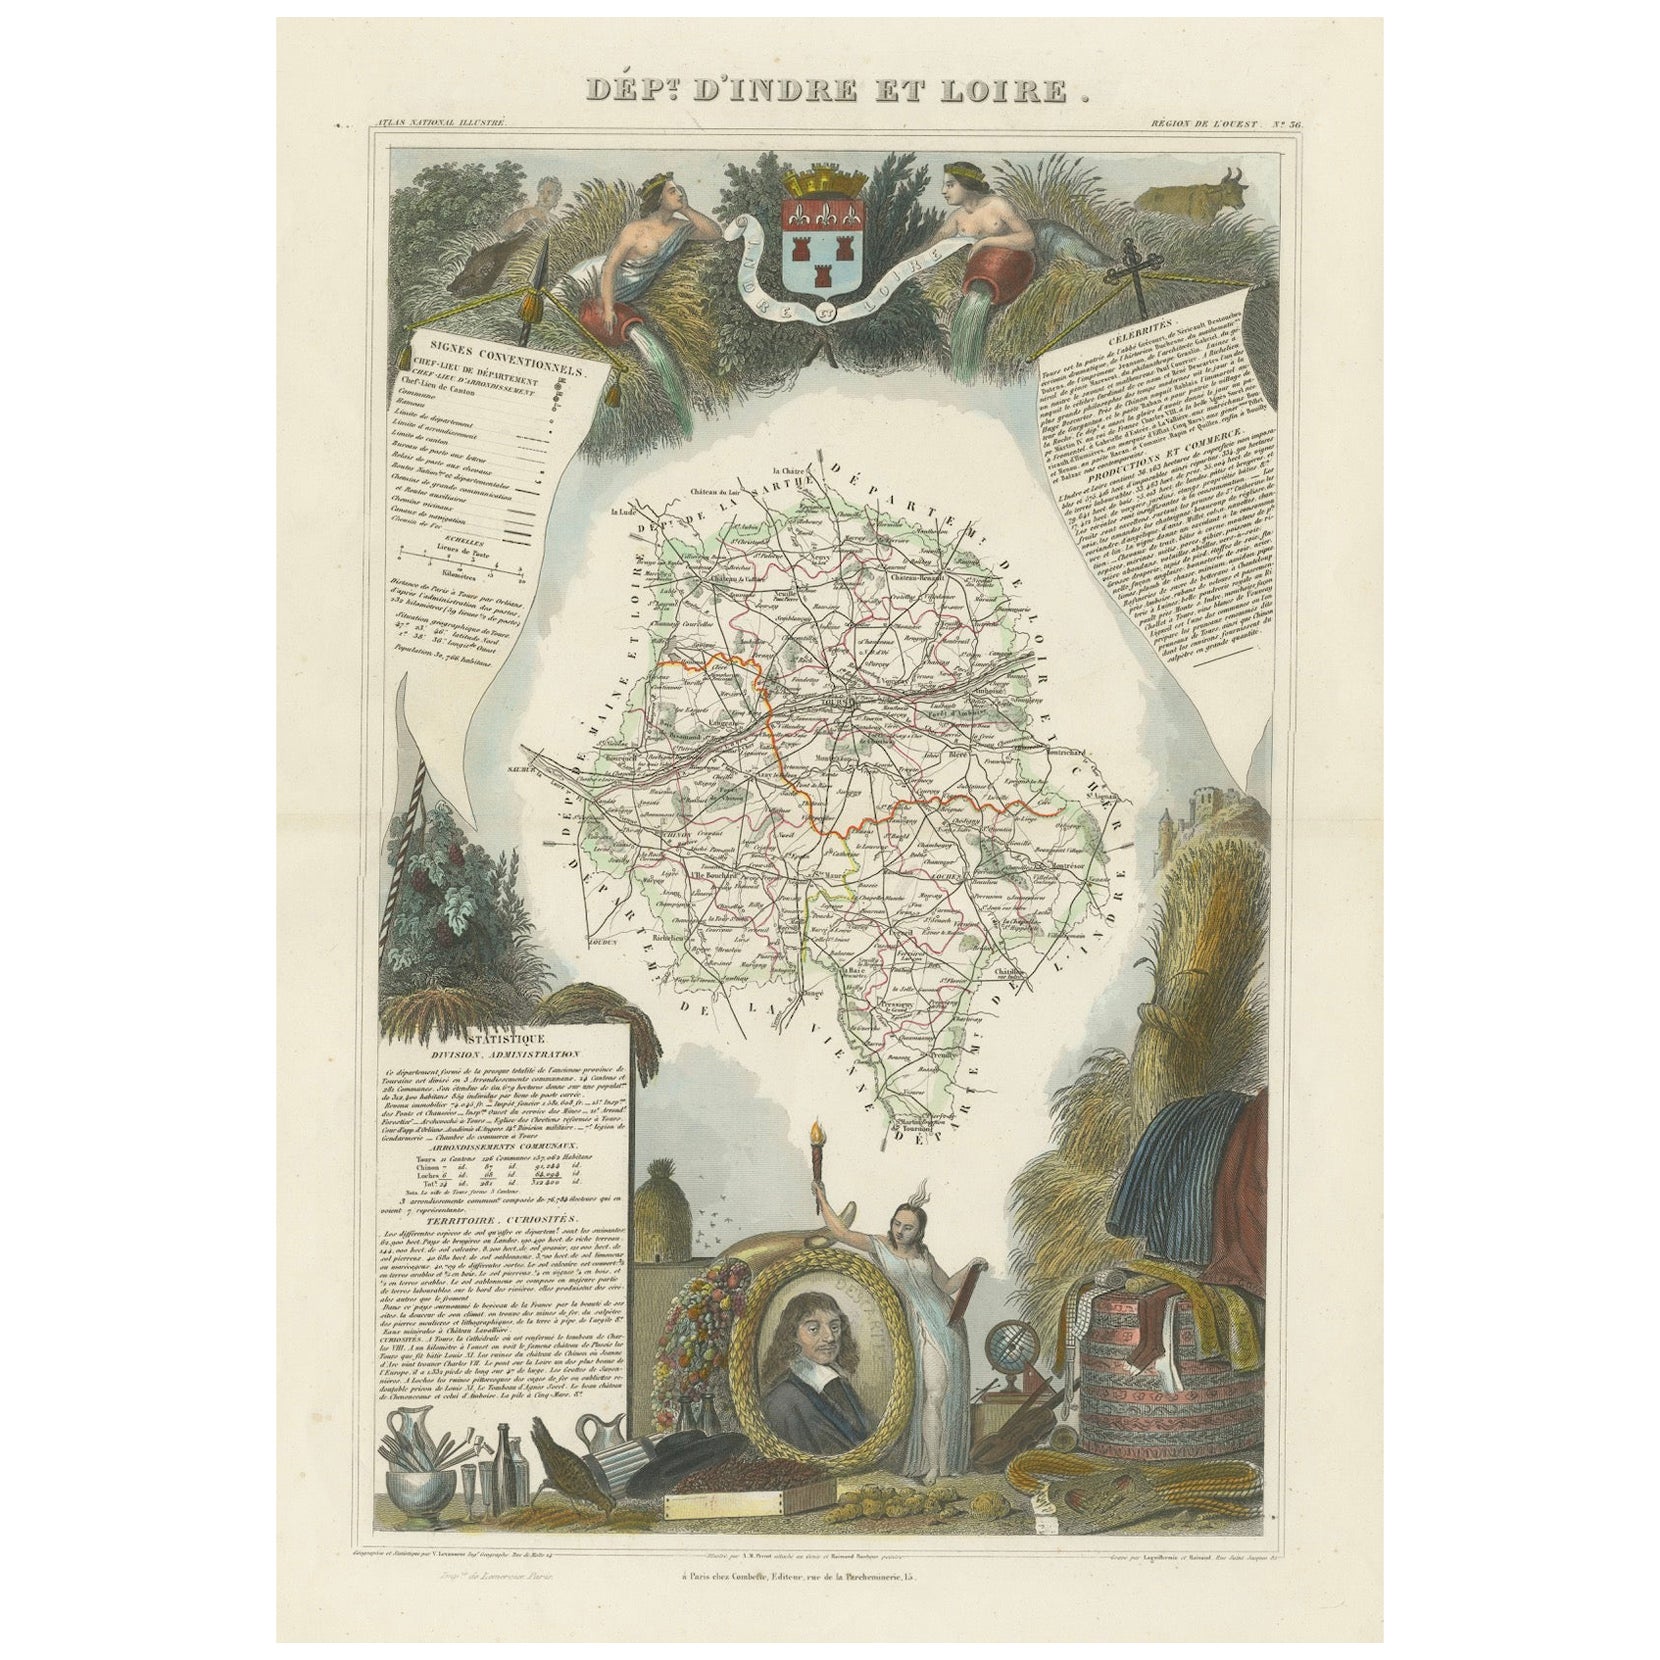 Mapping History: The Decorative Cartography of Indre-et-Loire von Levasseur, 1856 im Angebot